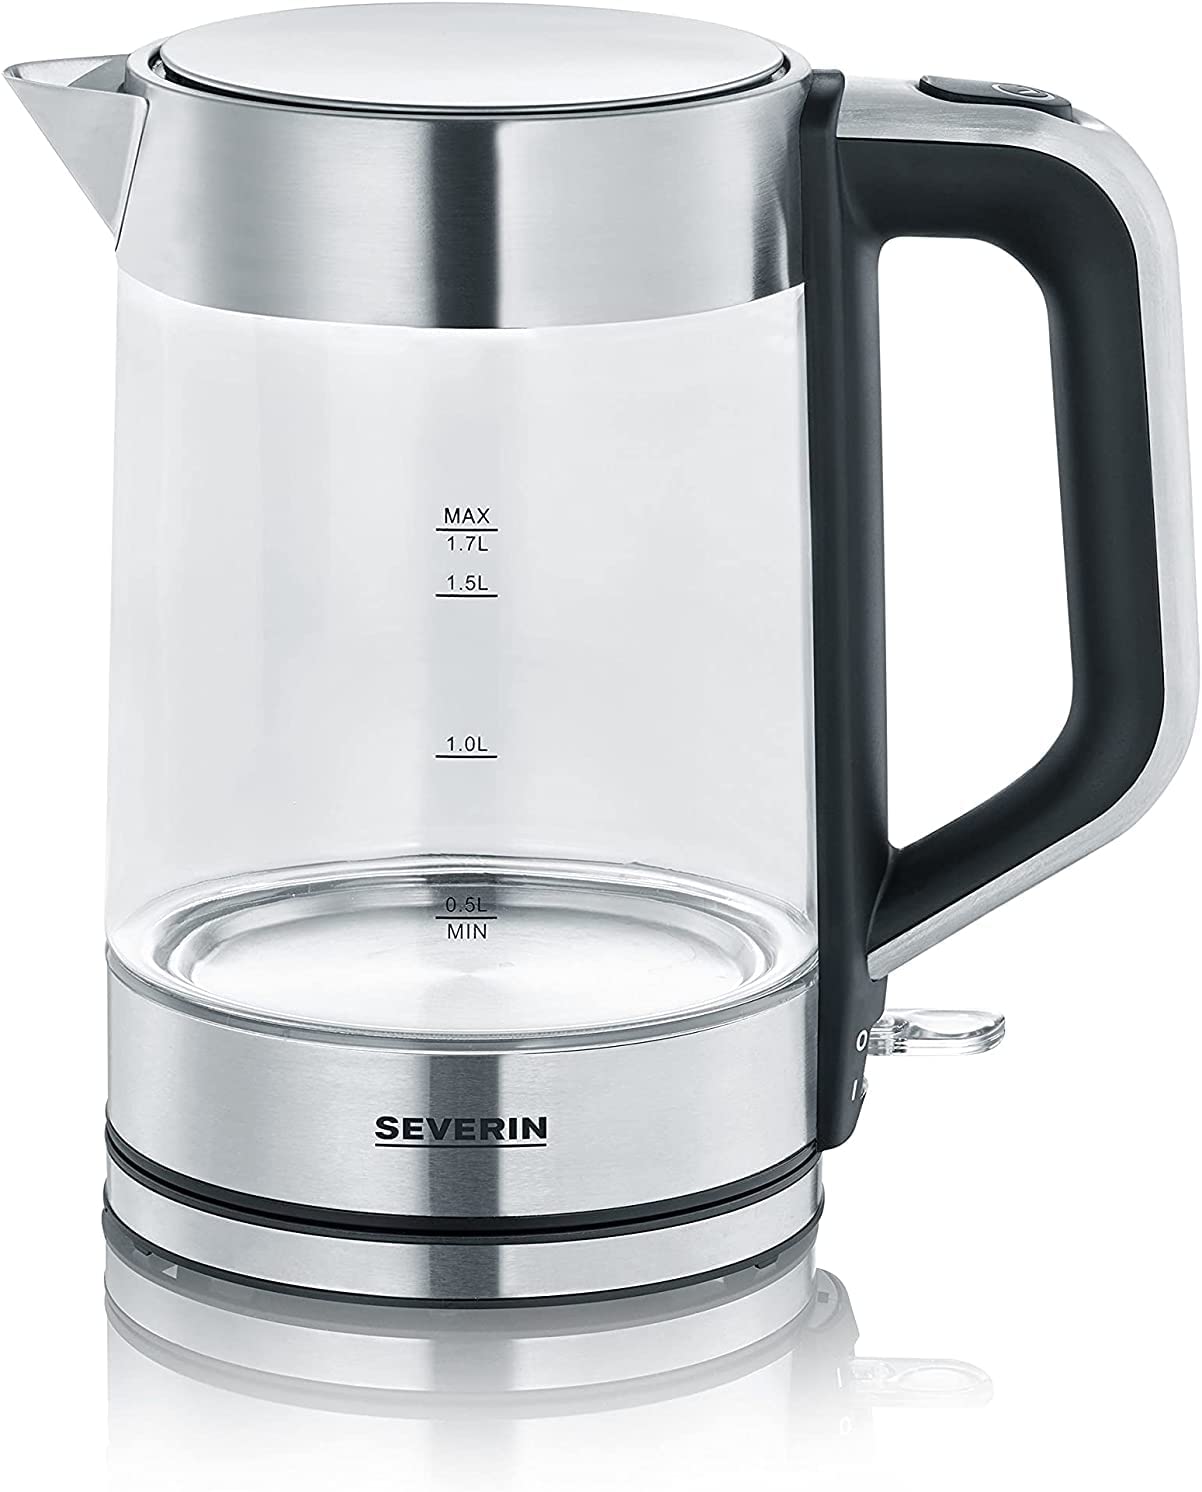 SEVERIN 3420-000 WK 3420 kettle, 2200, 1.7 litres, glass/stainless steel brushed/black and hand mixer with spiral cable, approx. 400 W, HM 3832, silver/black